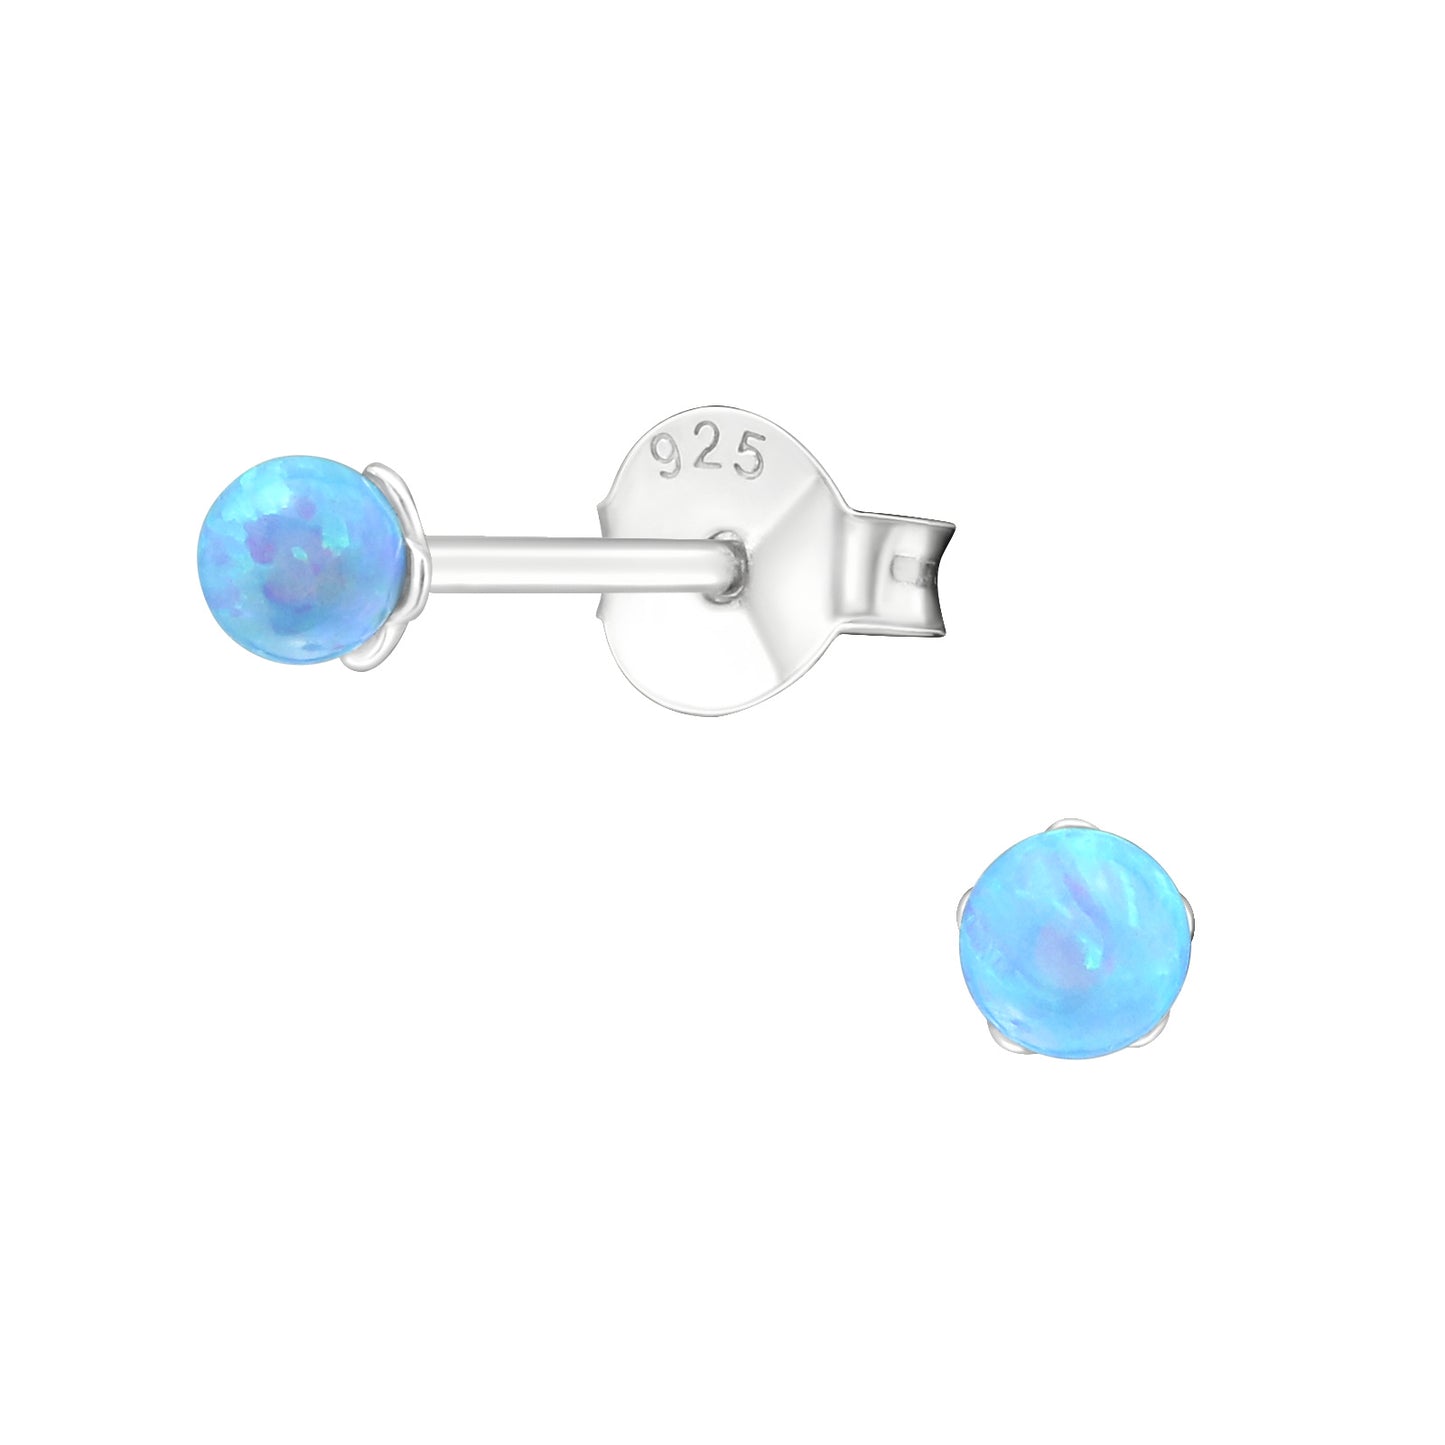 IRIDESCENT OPAL STUDS - Colour Shifting Sterling Silver Earrings (synthetic opal)